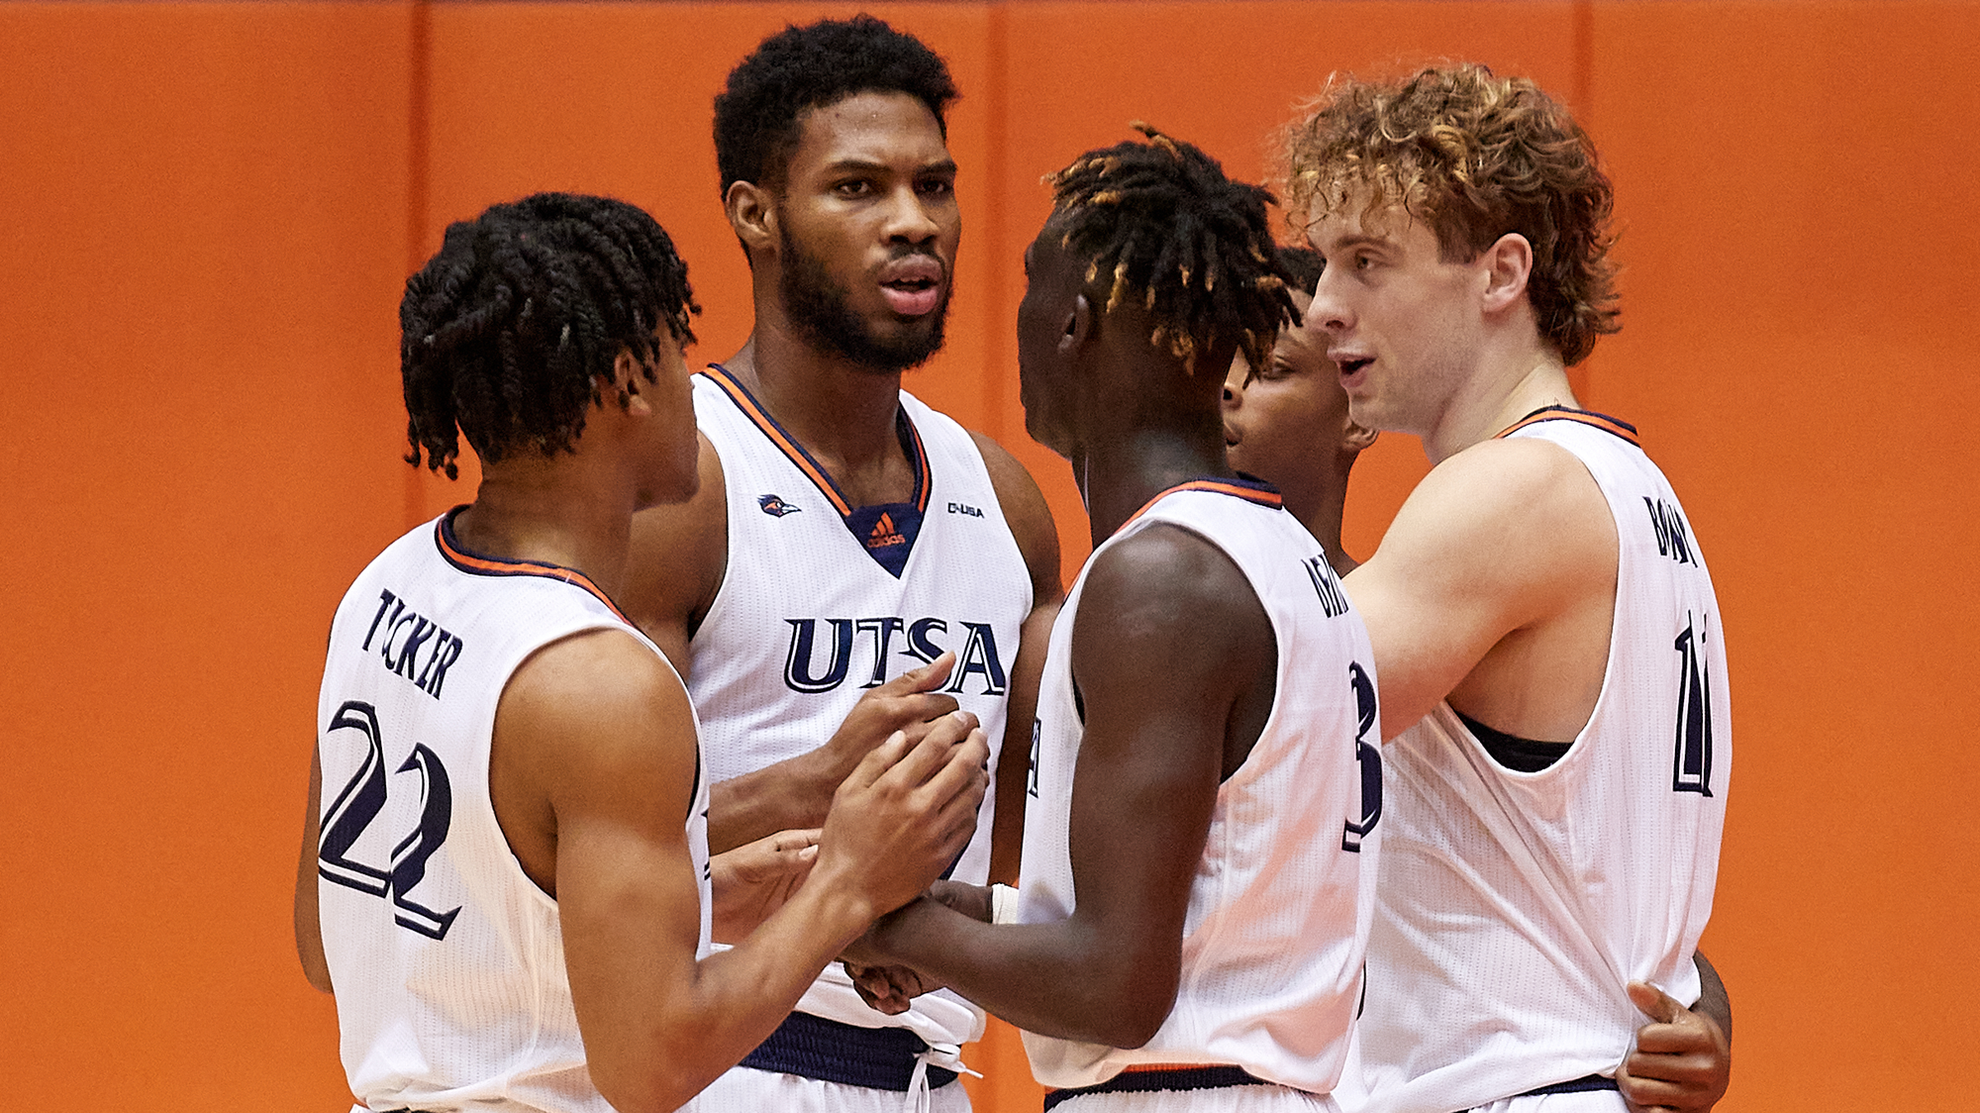 The Utah Jazz announced their training camp roster for the 2021-22